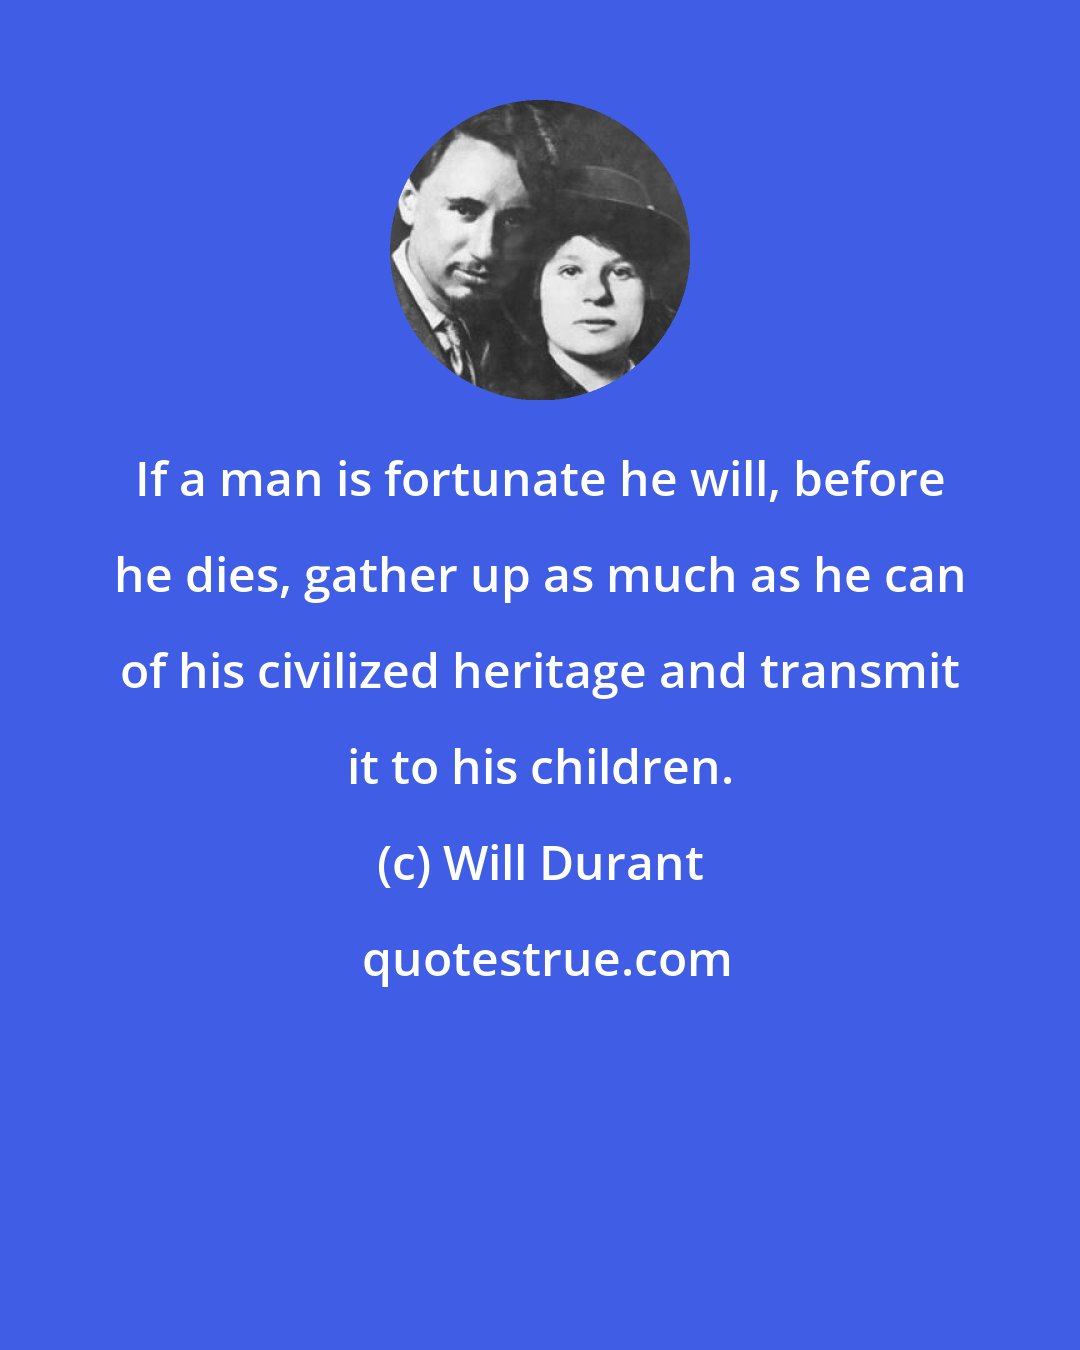 Will Durant: If a man is fortunate he will, before he dies, gather up as much as he can of his civilized heritage and transmit it to his children.